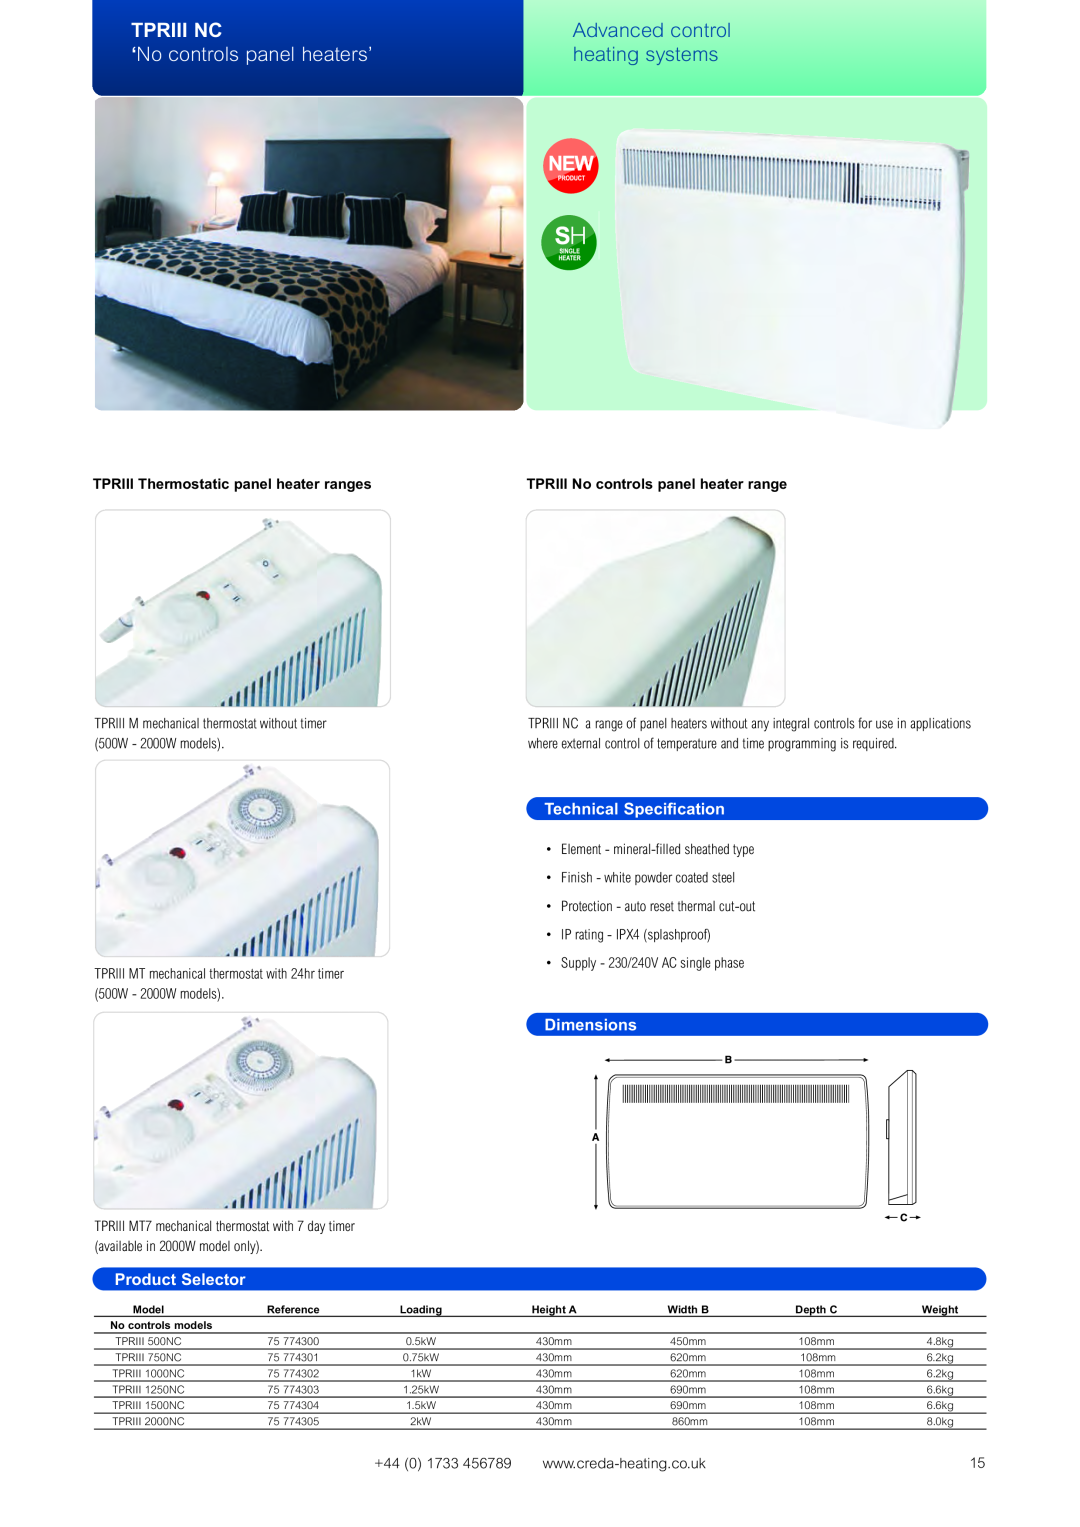 Creda Heating Solution Tpriii Nc, Advanced control, ‘No controls panel heaters’, heating systems, Technical Specification 